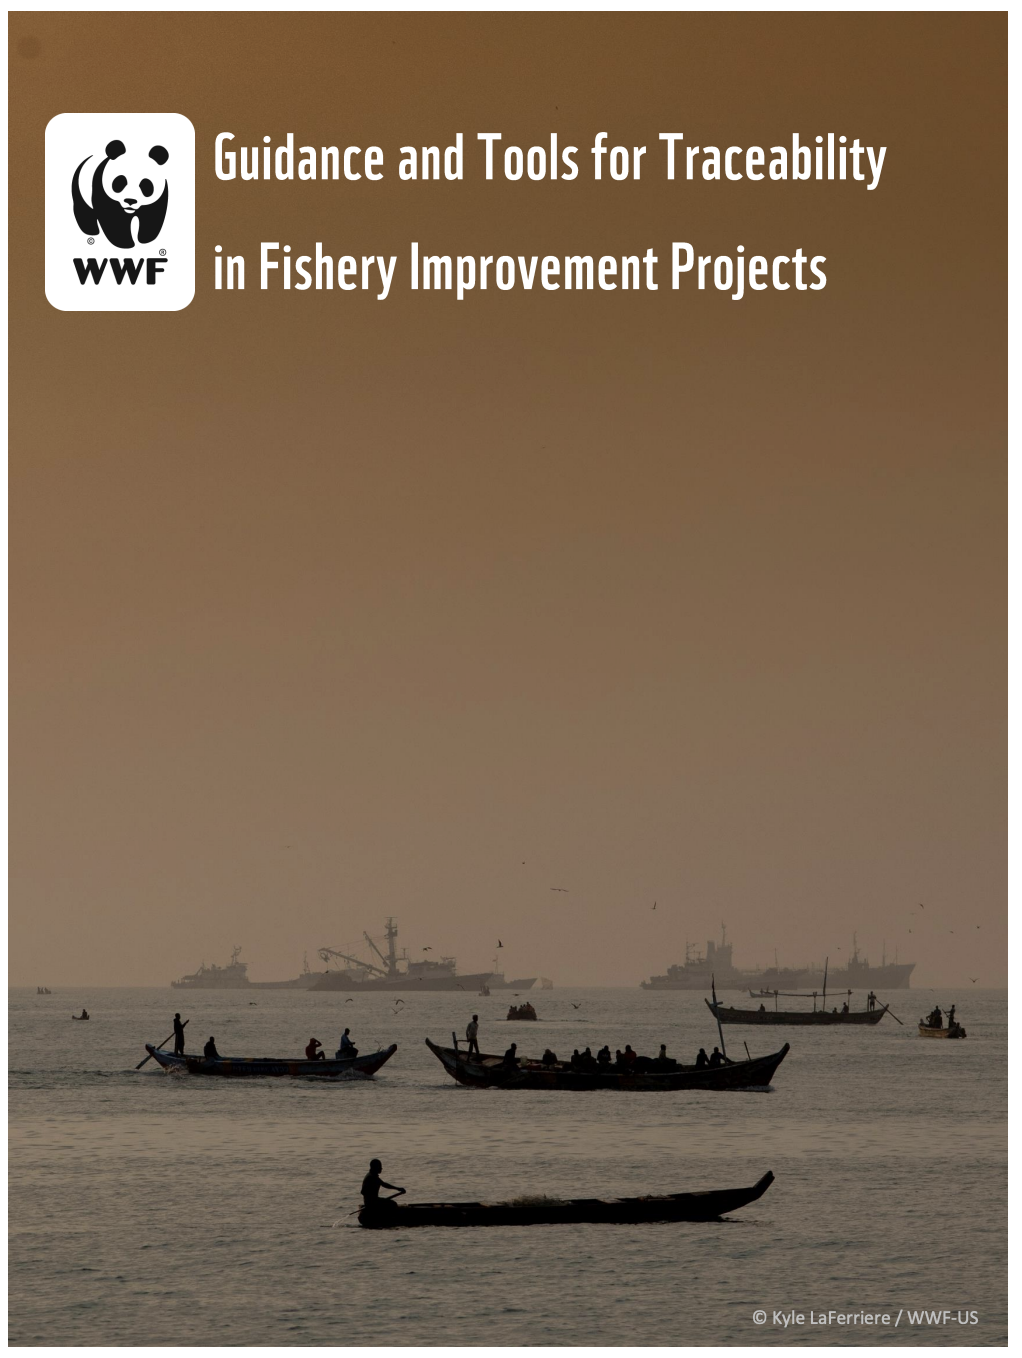 Guidance and Tools for Traceability in Fishery Improvement Projects